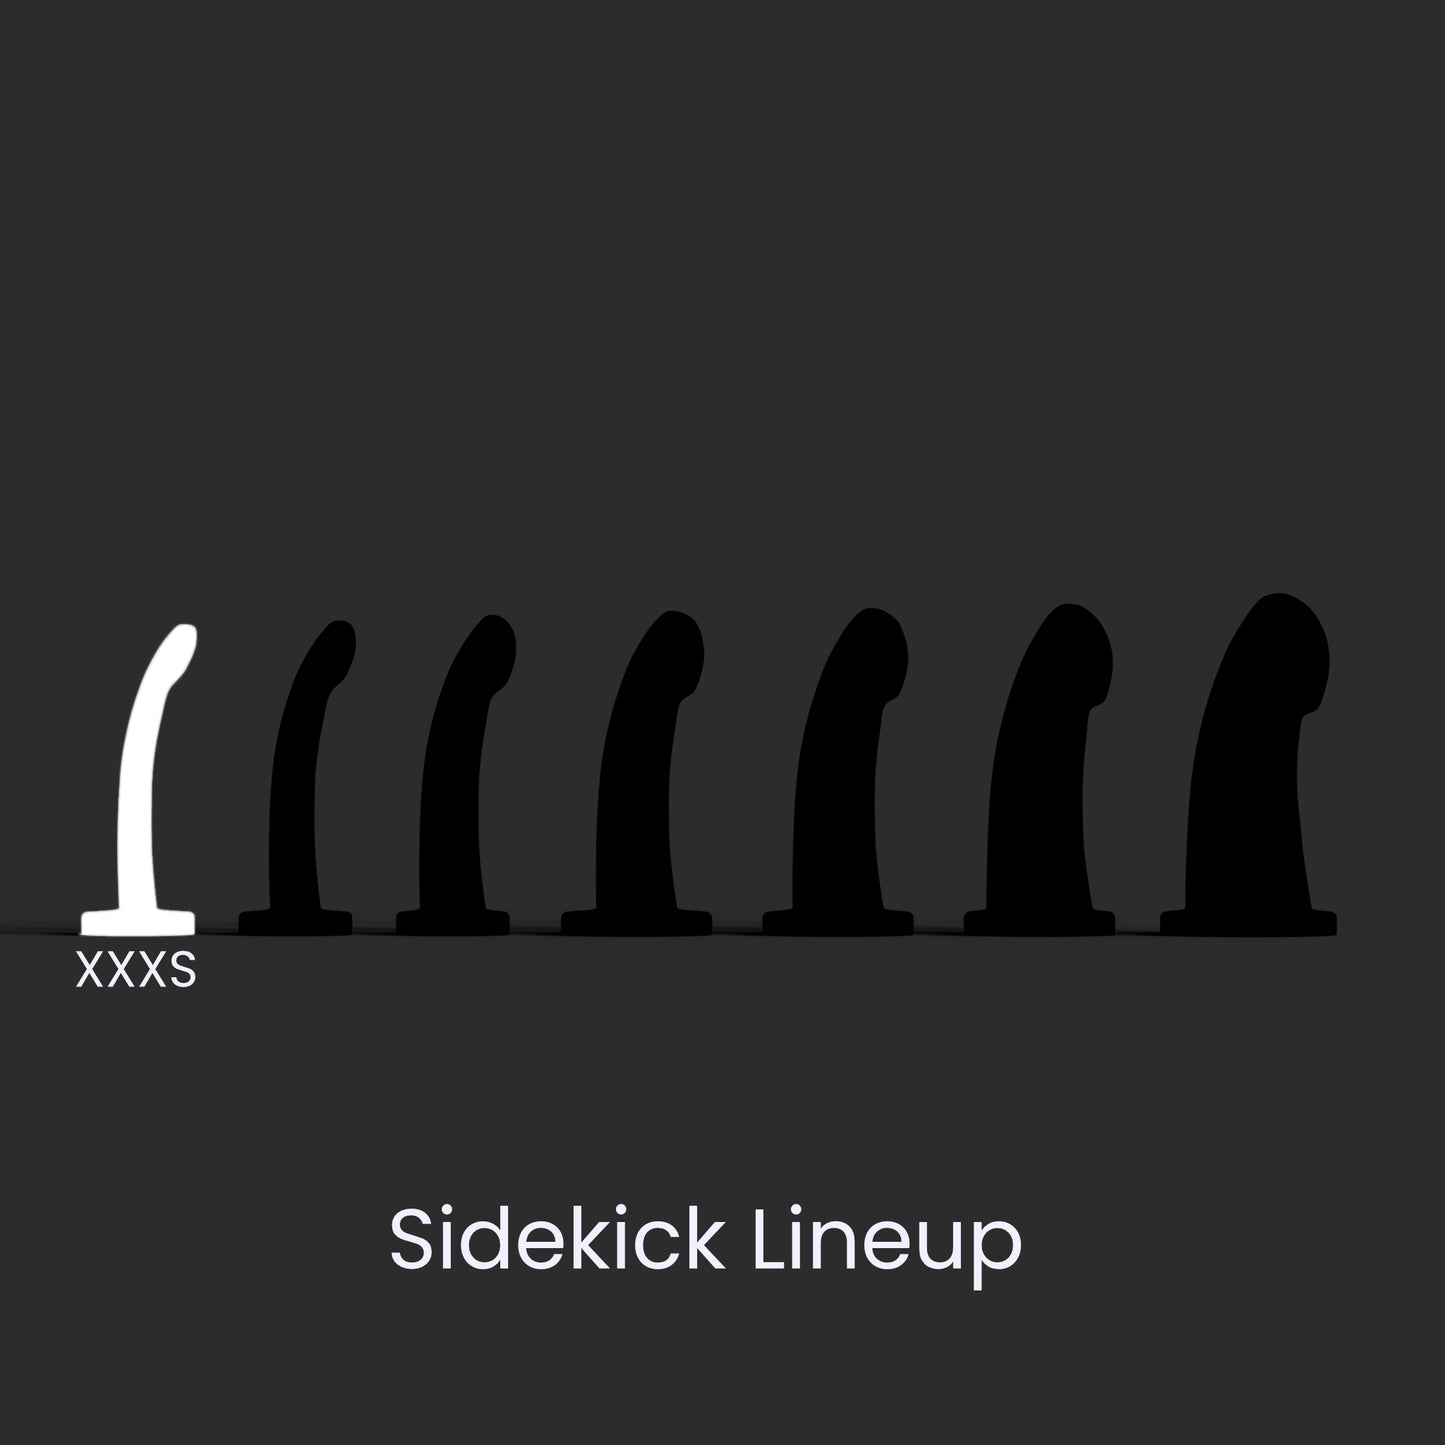 Diagram showing the seven Sidekick models lined up left to right smallest to largest, and the XXXS in the first position.